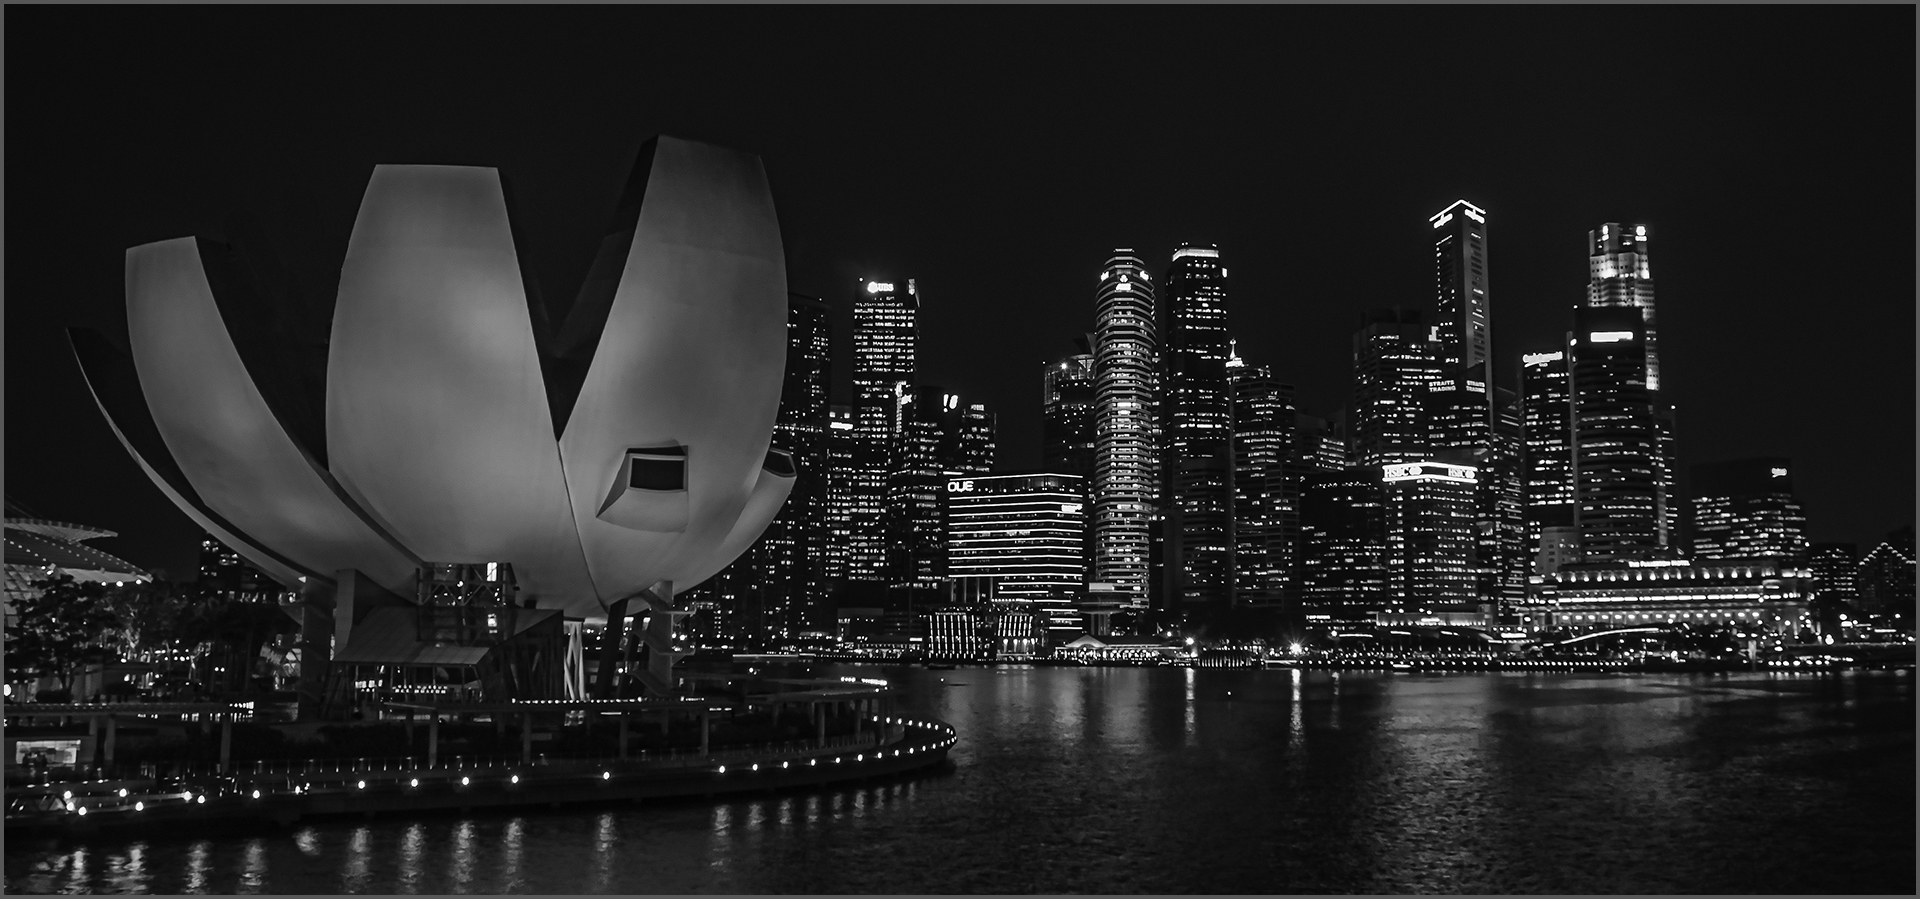 Mosel Terry Singapore in Mono 9 April 2021   City & Urban Scapes